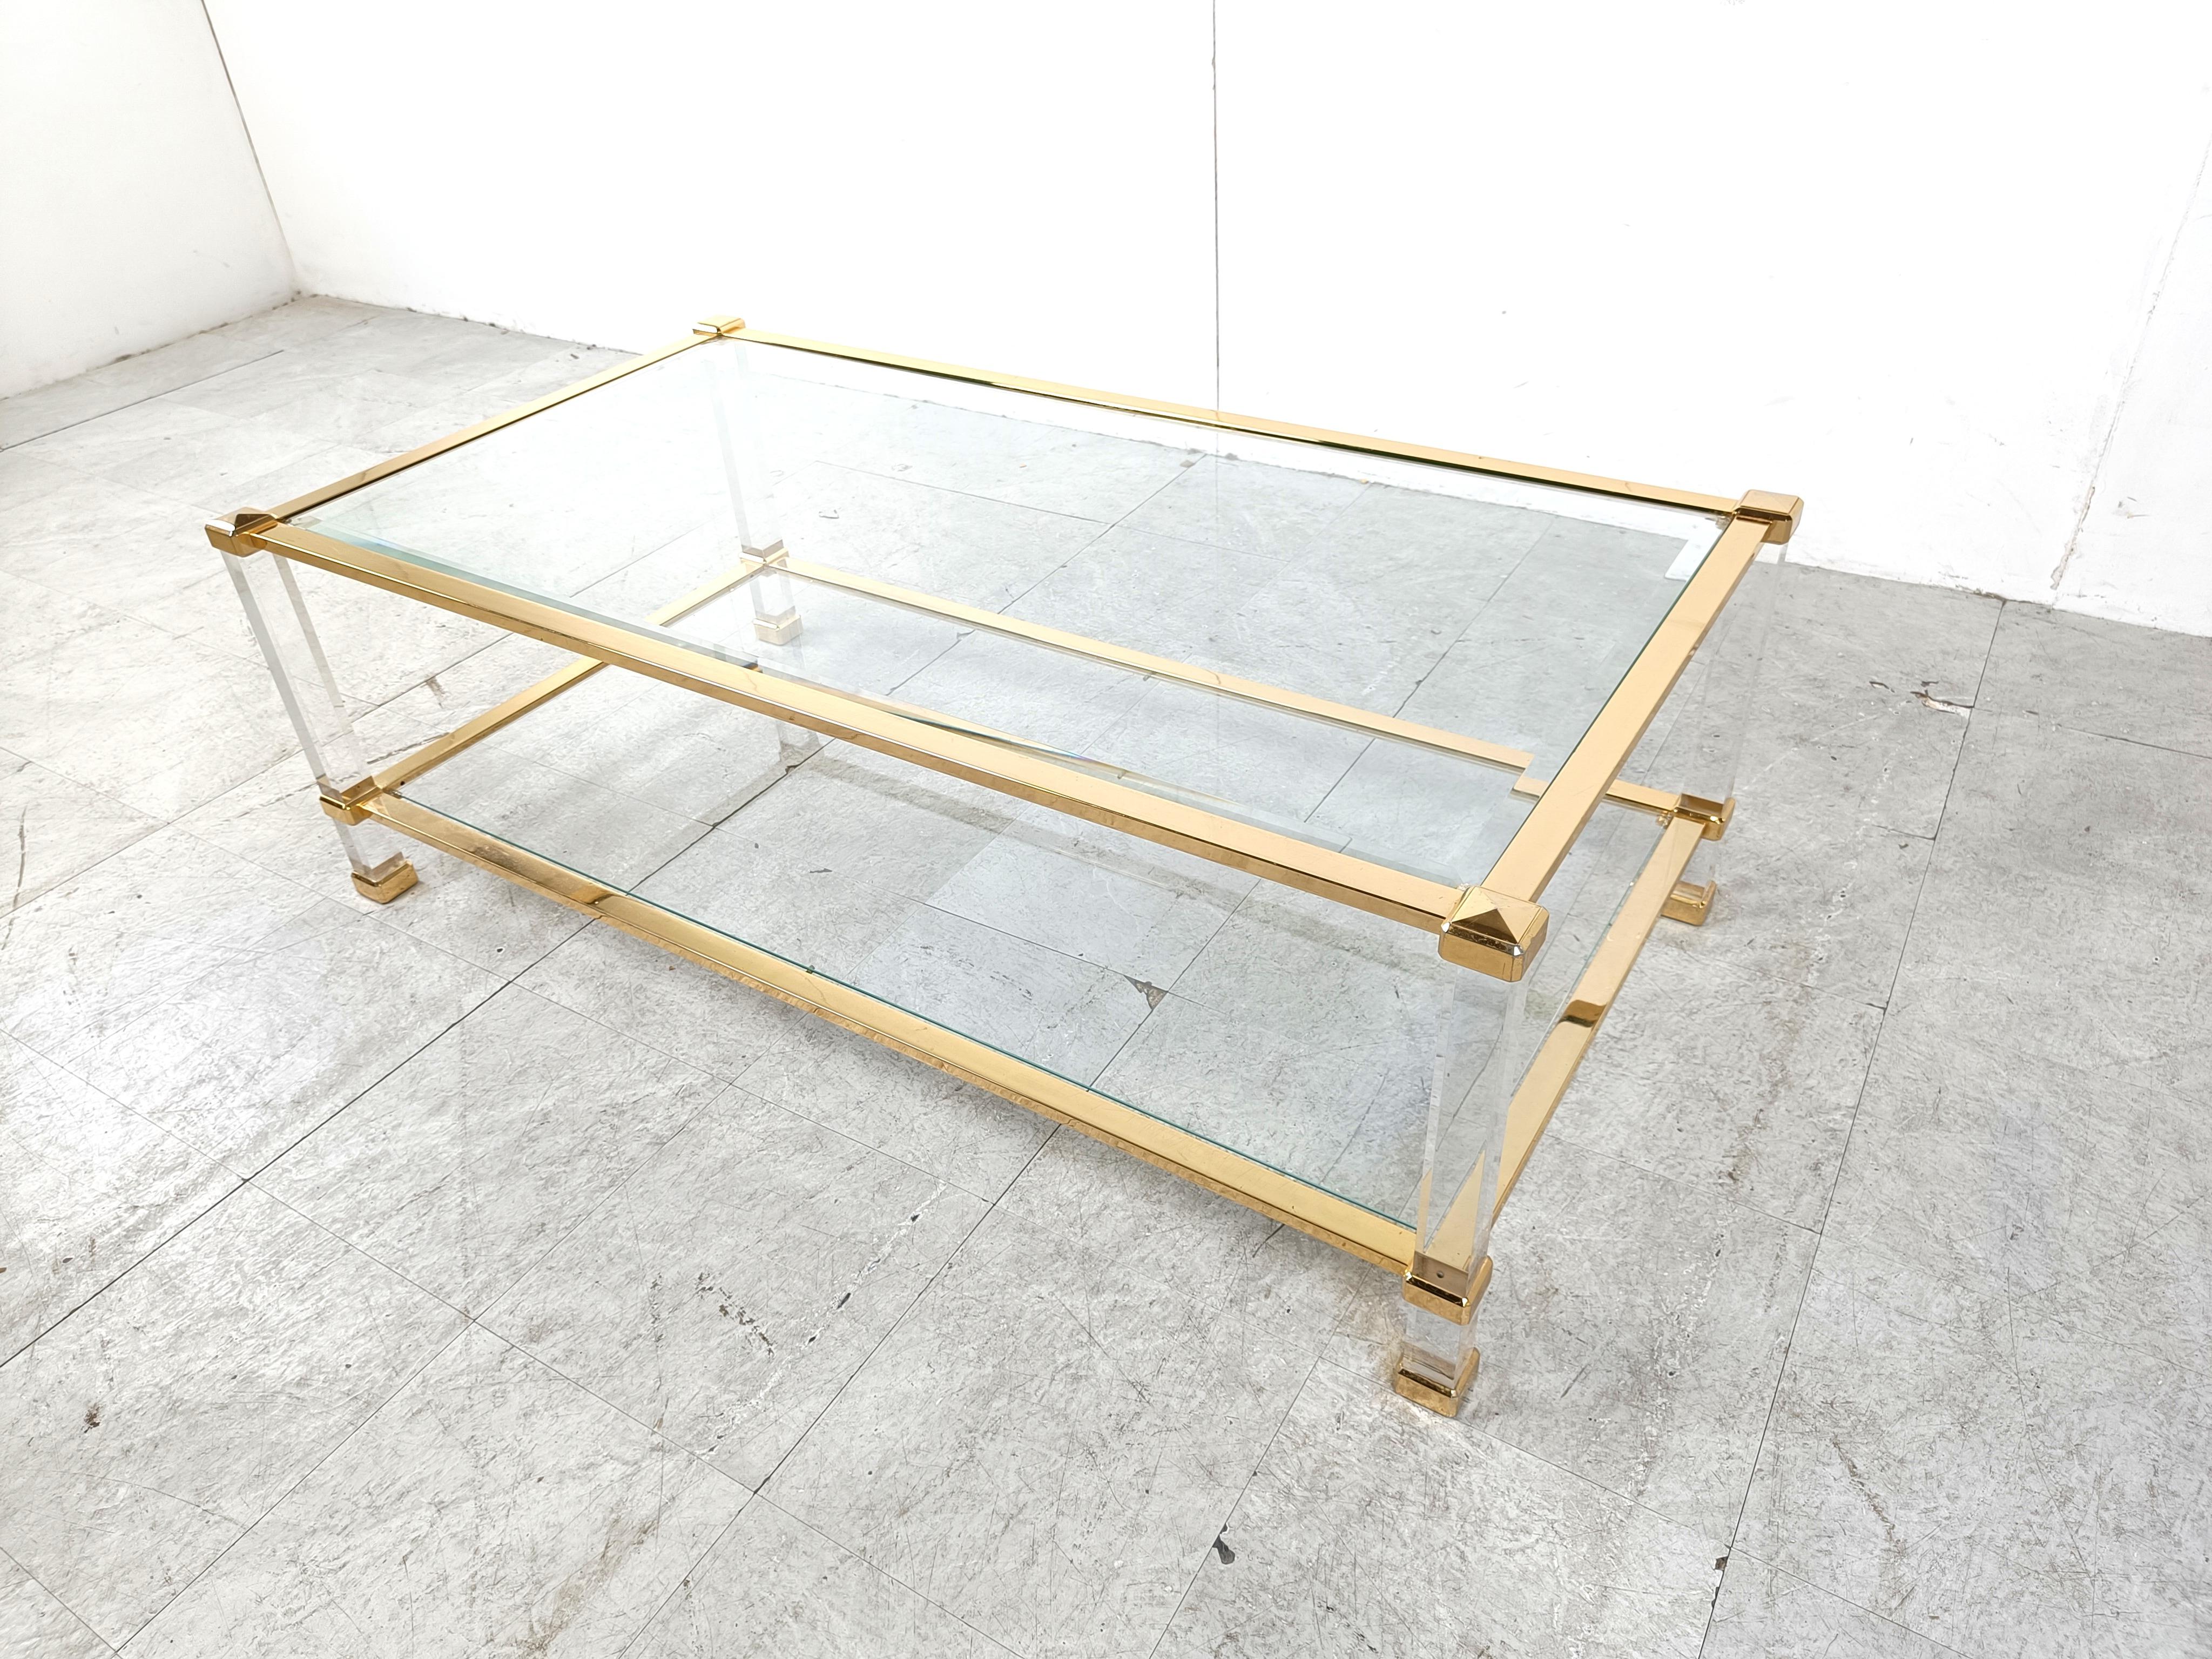 Vintage rectangular two tier coffee table made from lucite and brass with clear glass.

1970s - France

Good condition, clear glass tops

Height: 45cm
Width: 130cm
Depth: 70cm

Ref.: 546664
